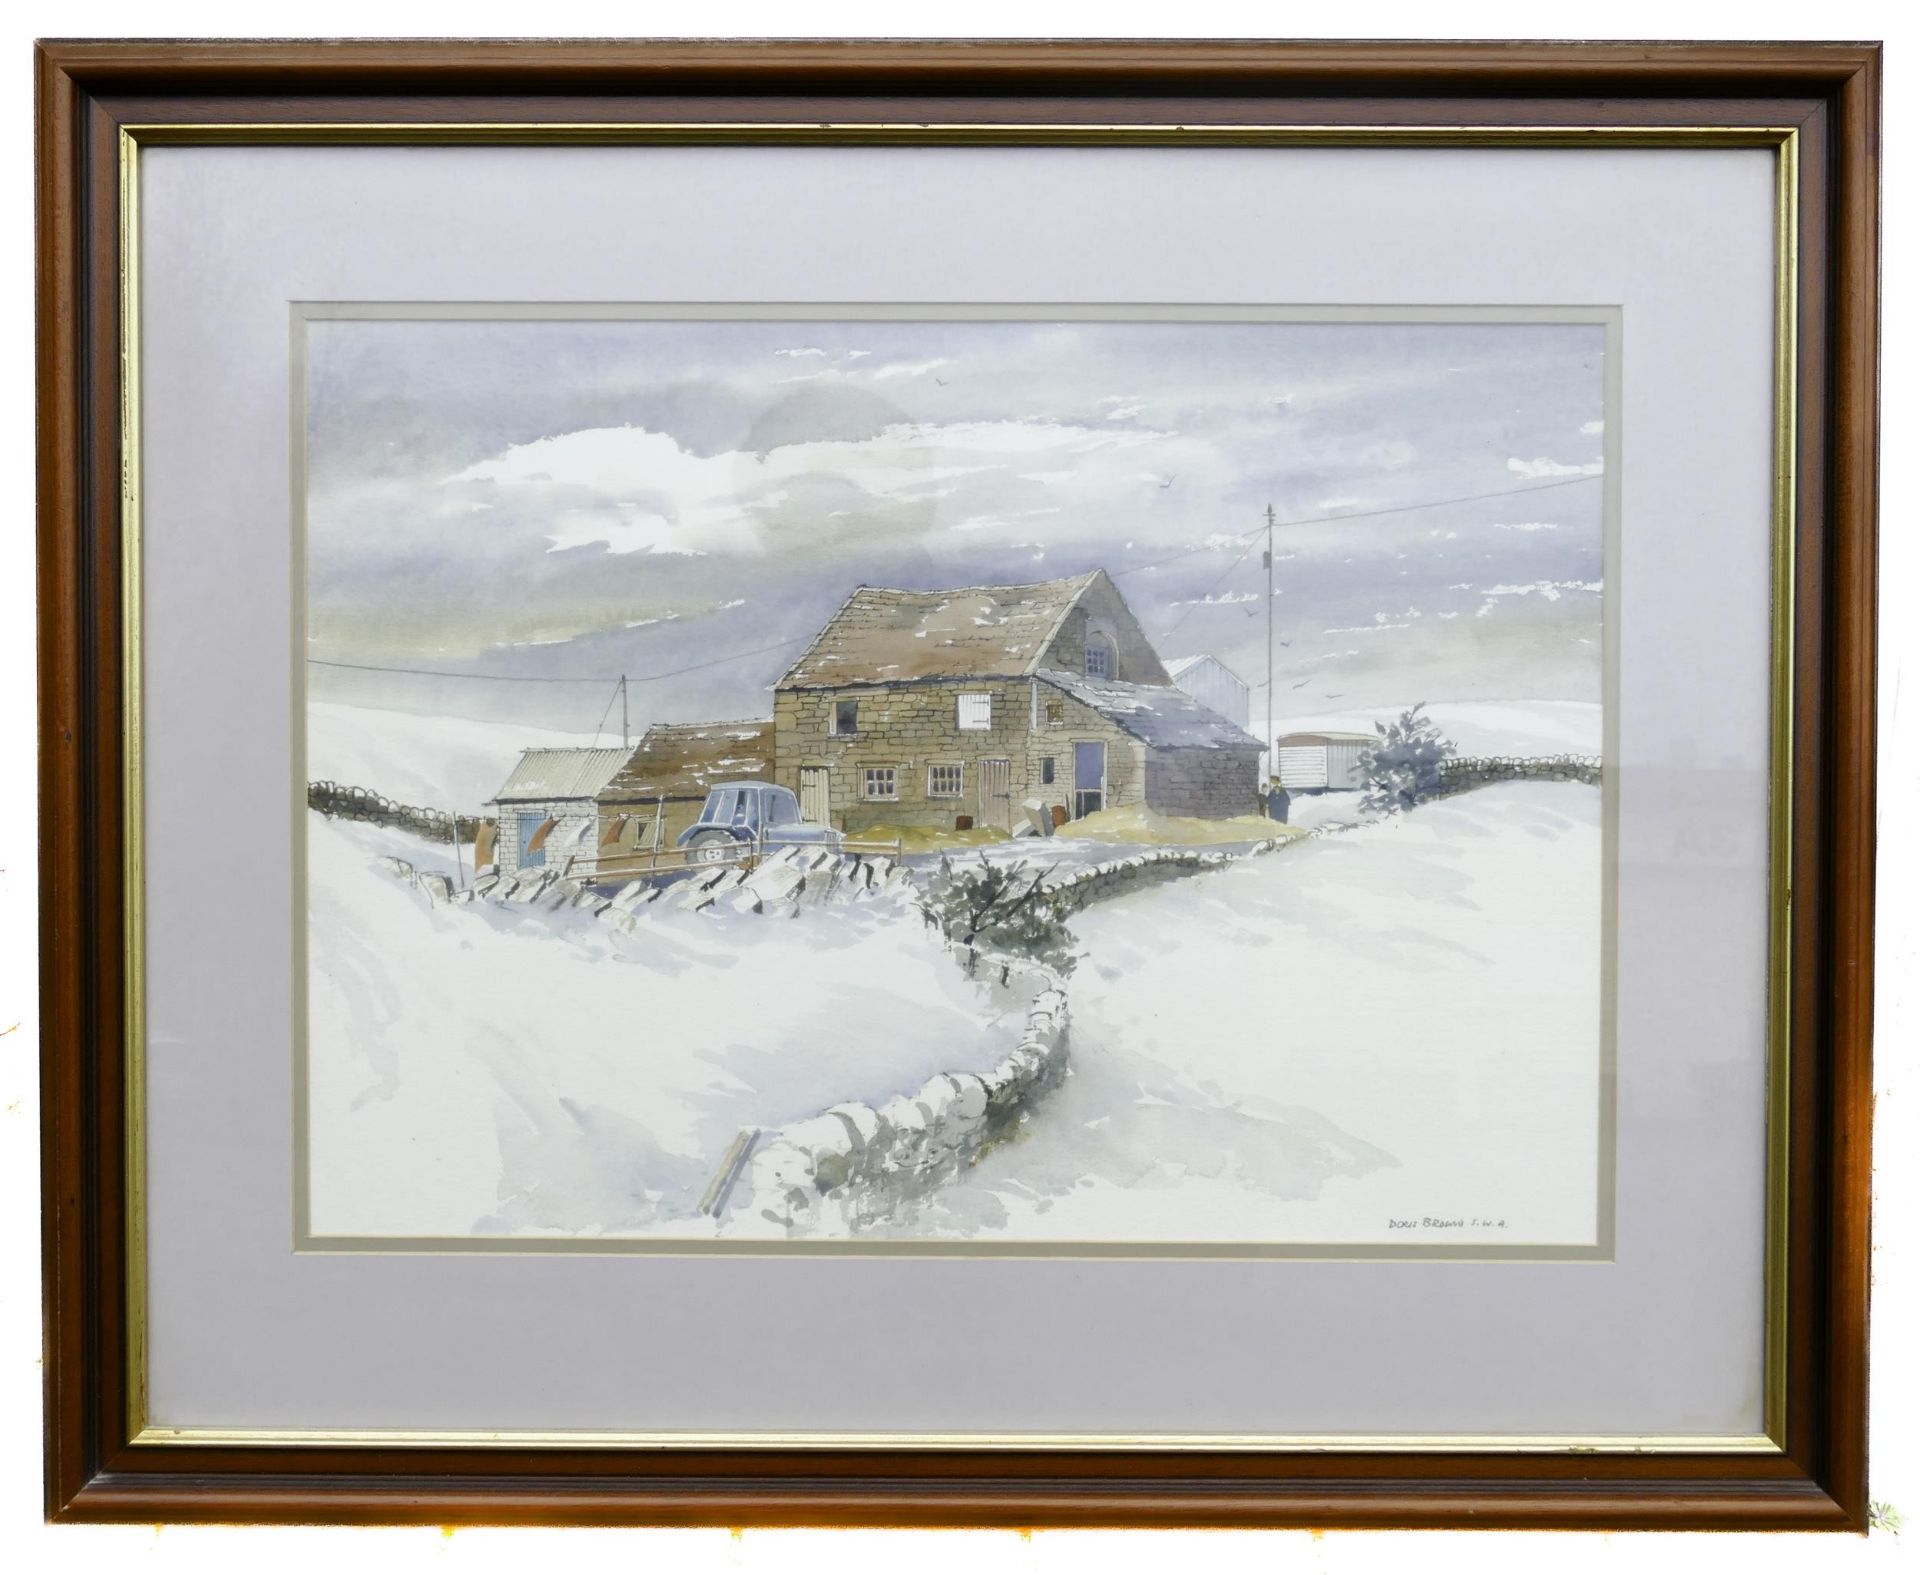 Doris Brown S.W.A (1933-2023) Winter View of a Rural Farmhouse. Watercolour on Paper, signed lower